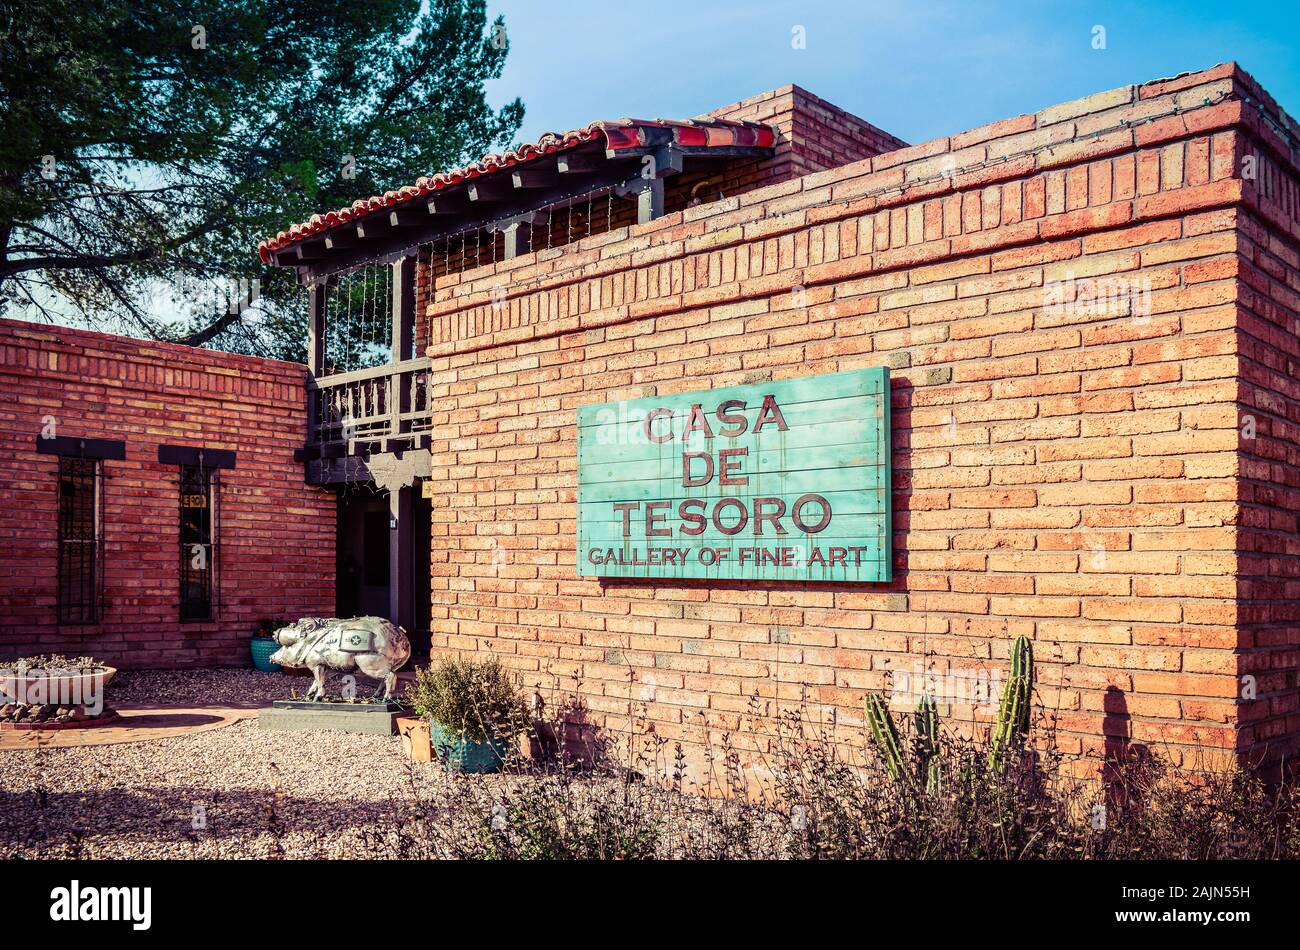 Southwestern adobe brick building houses Casa de Tesoro, Gallery of fine Art, with Javalina sculpture at entrance and turquoise sign at sunset Stock Photo